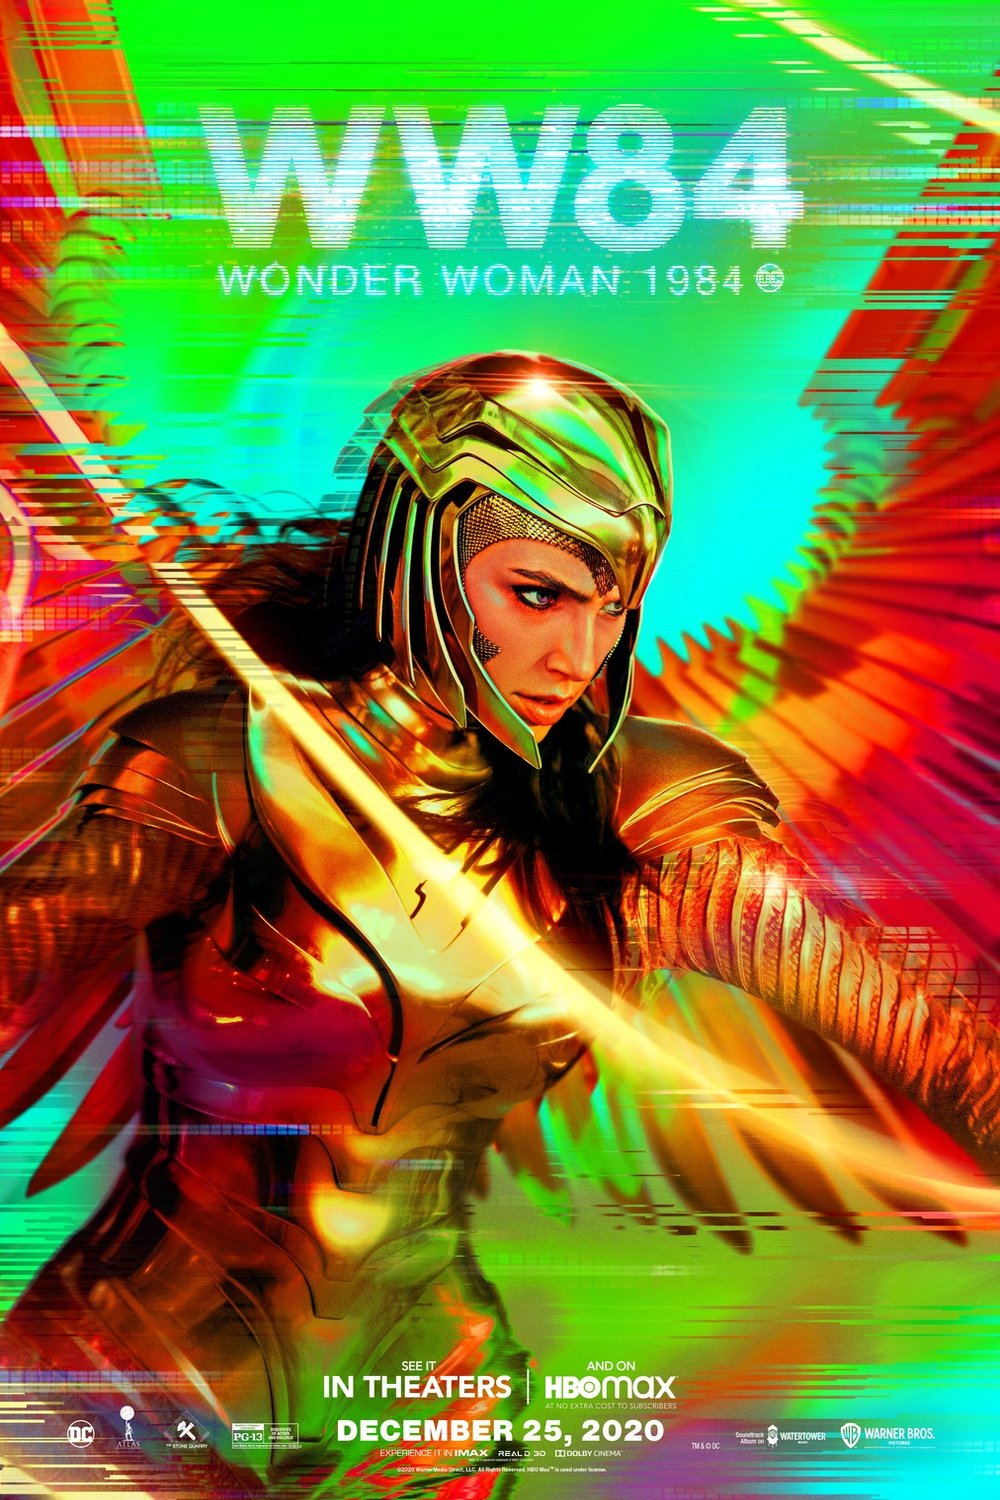 Poster of the movie Wonder Woman 1984 v.f.